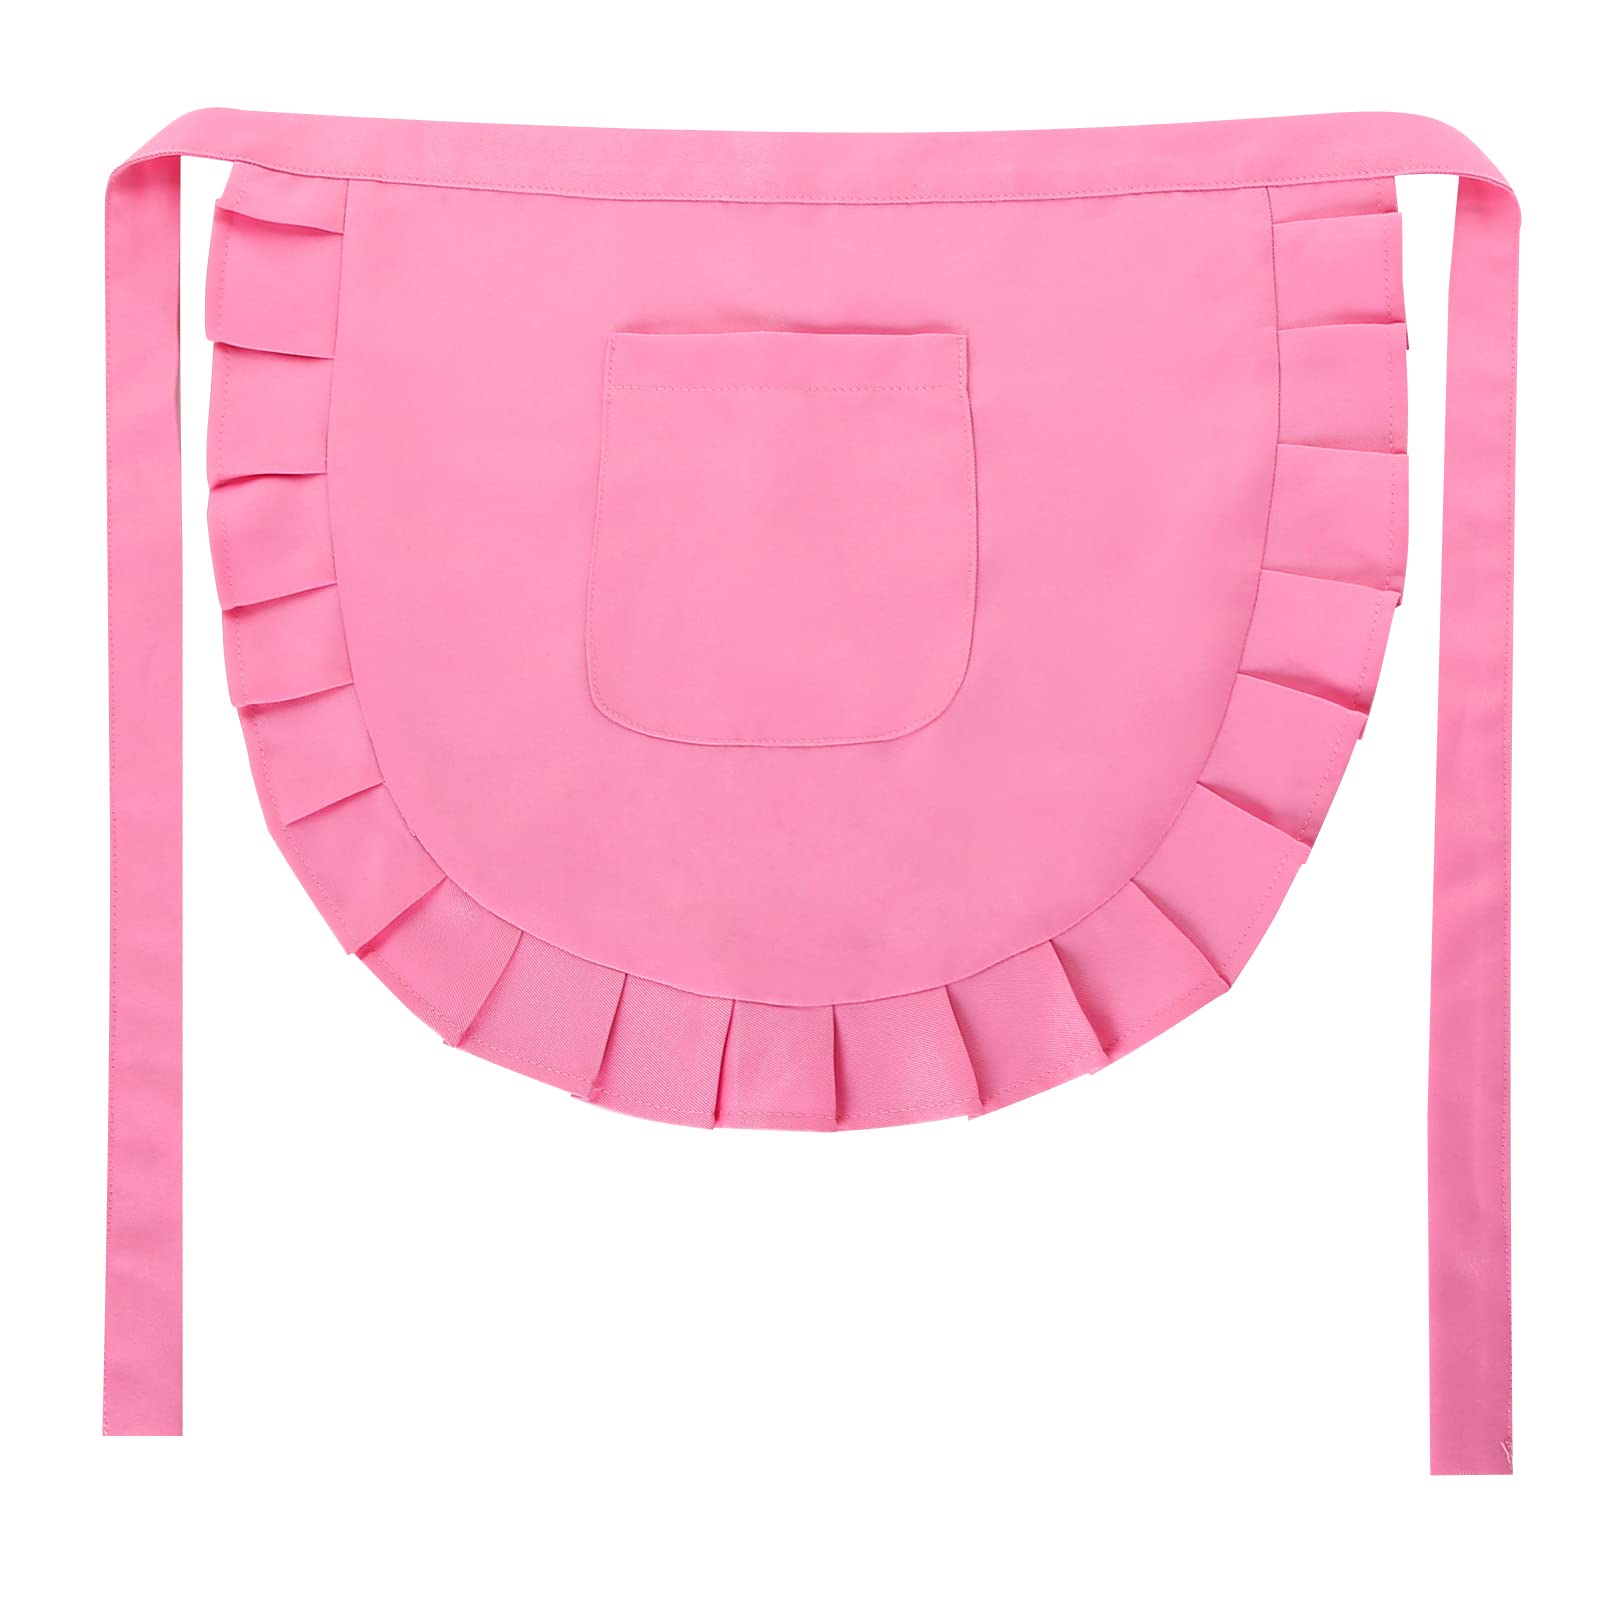 SUN2ROSE Girls Cosplay Waist Apron Tight Costume, Cotton Half Apron Kitchen Party Favors Also Fits for Kids Apron Cosplay (pink)